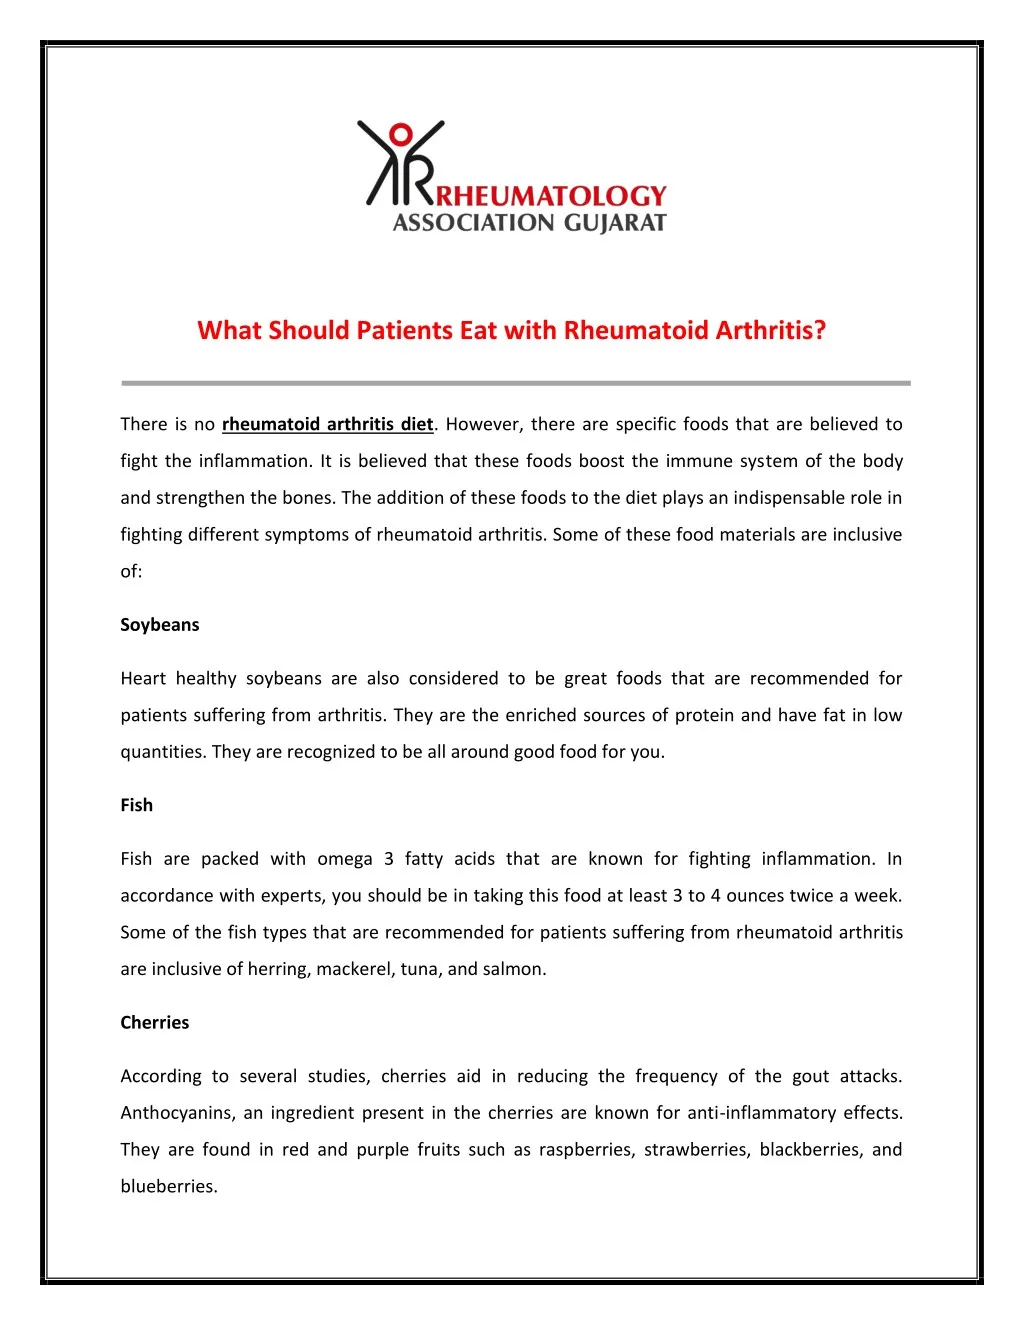 what should patients eat with rheumatoid arthritis